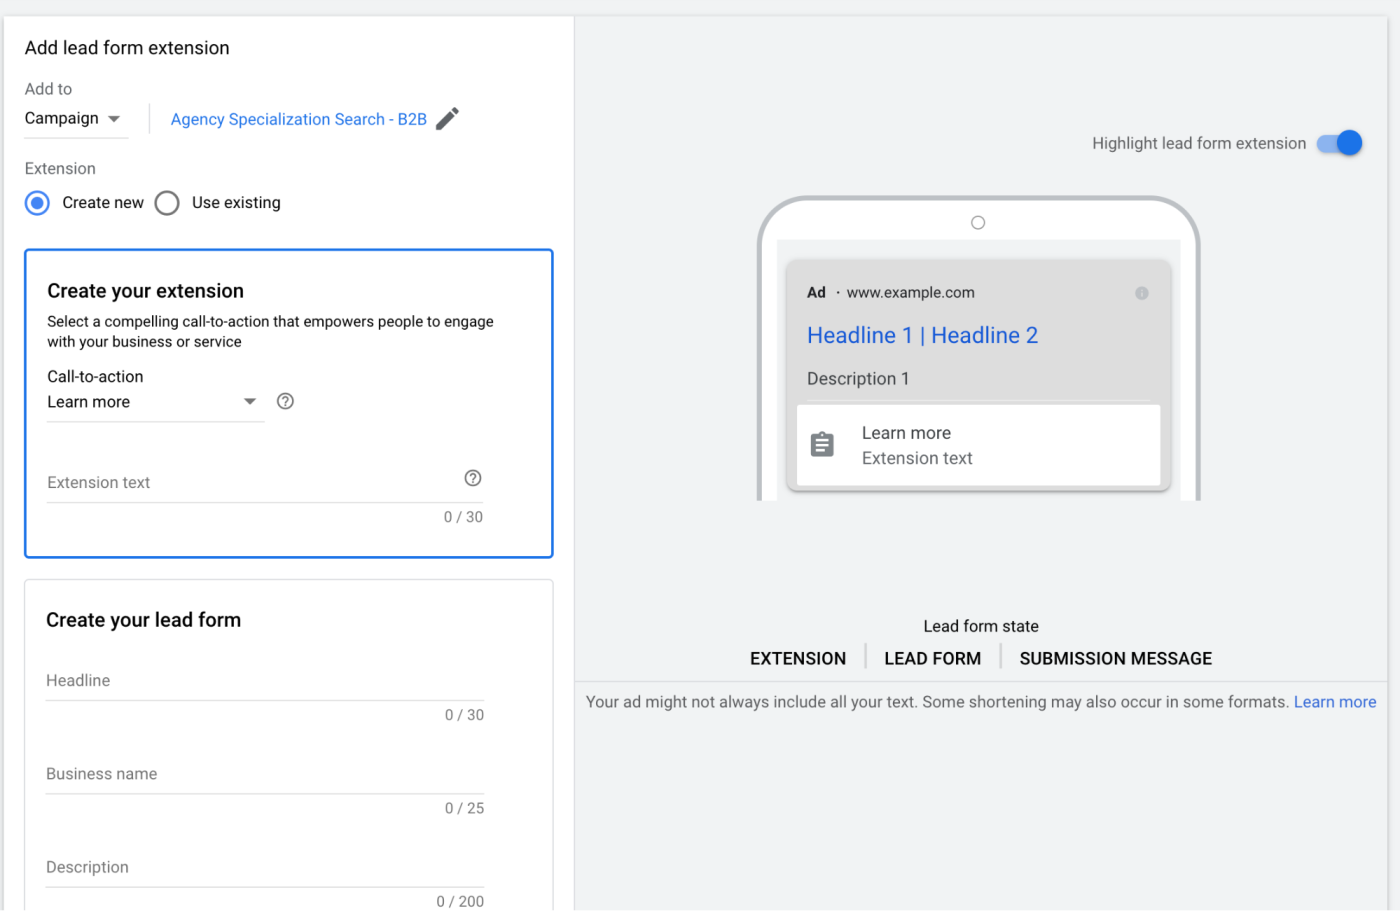 Creating the Google lead forms extension